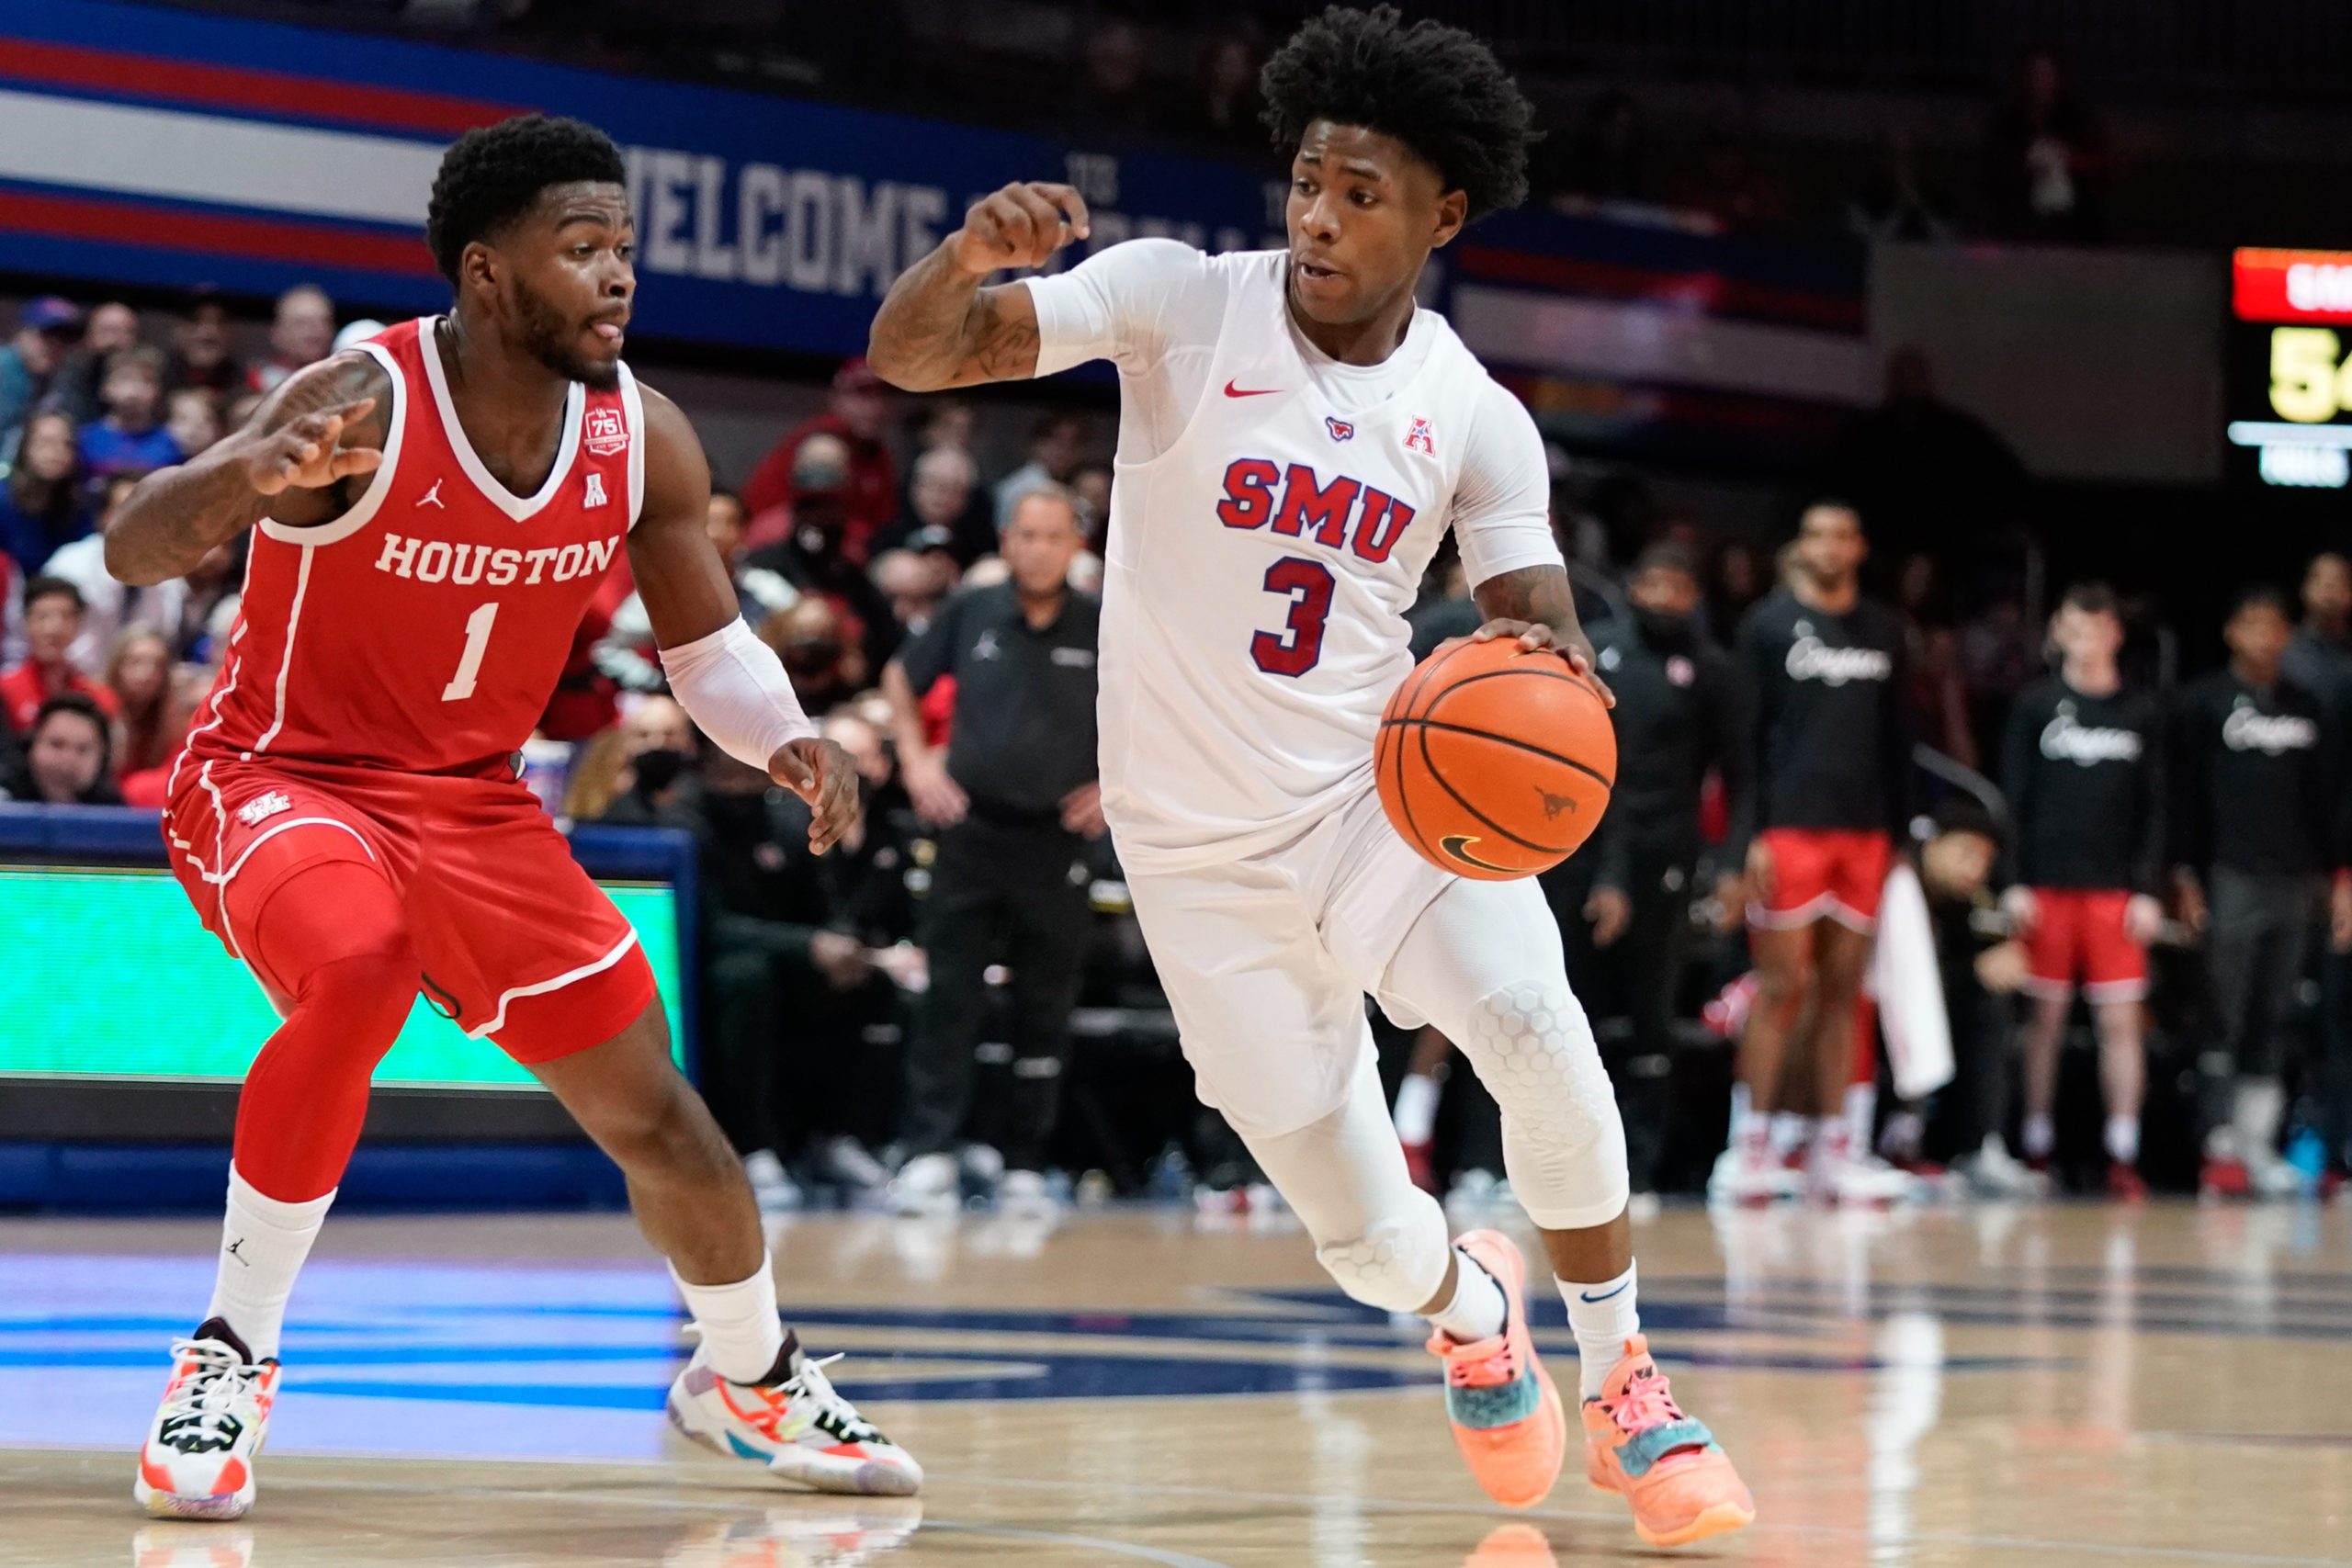 SMU Mustangs Come from Behind to Stun No. 6 Houston Cougars